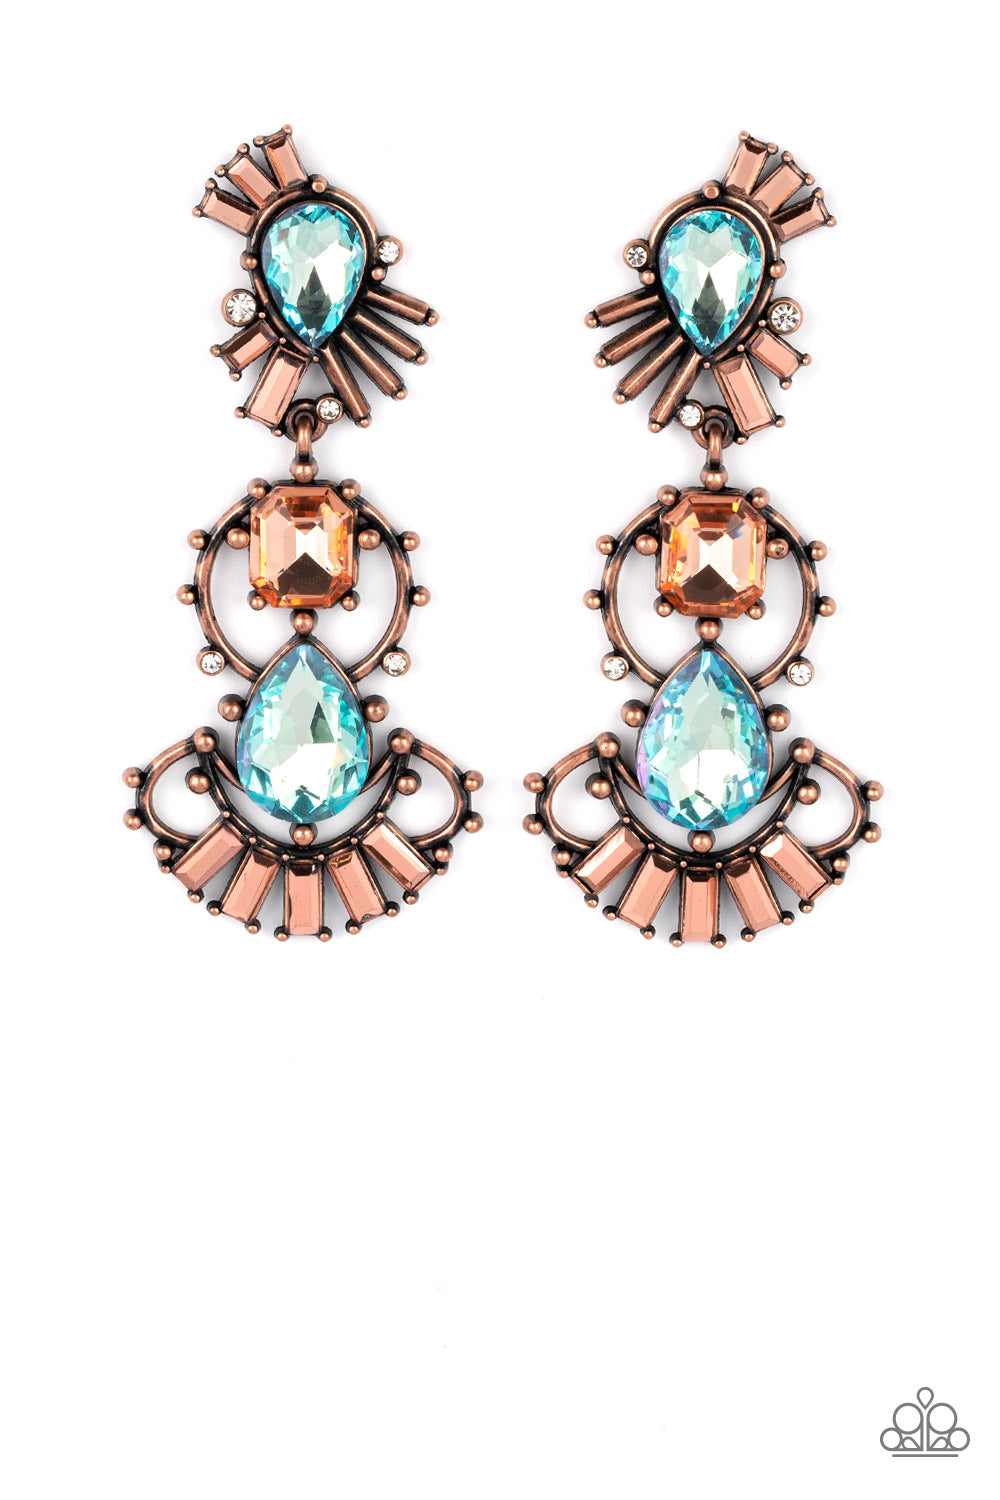 Paparazzi Accessories Ultra Universal - Copper A cosmic collision of iridescent blue teardrop gems and a solitaire topaz emerald cut rhinestone haphazardly adorns studded copper frames. Dotted in round white and emerald cut aurum rhinestone accents, the a